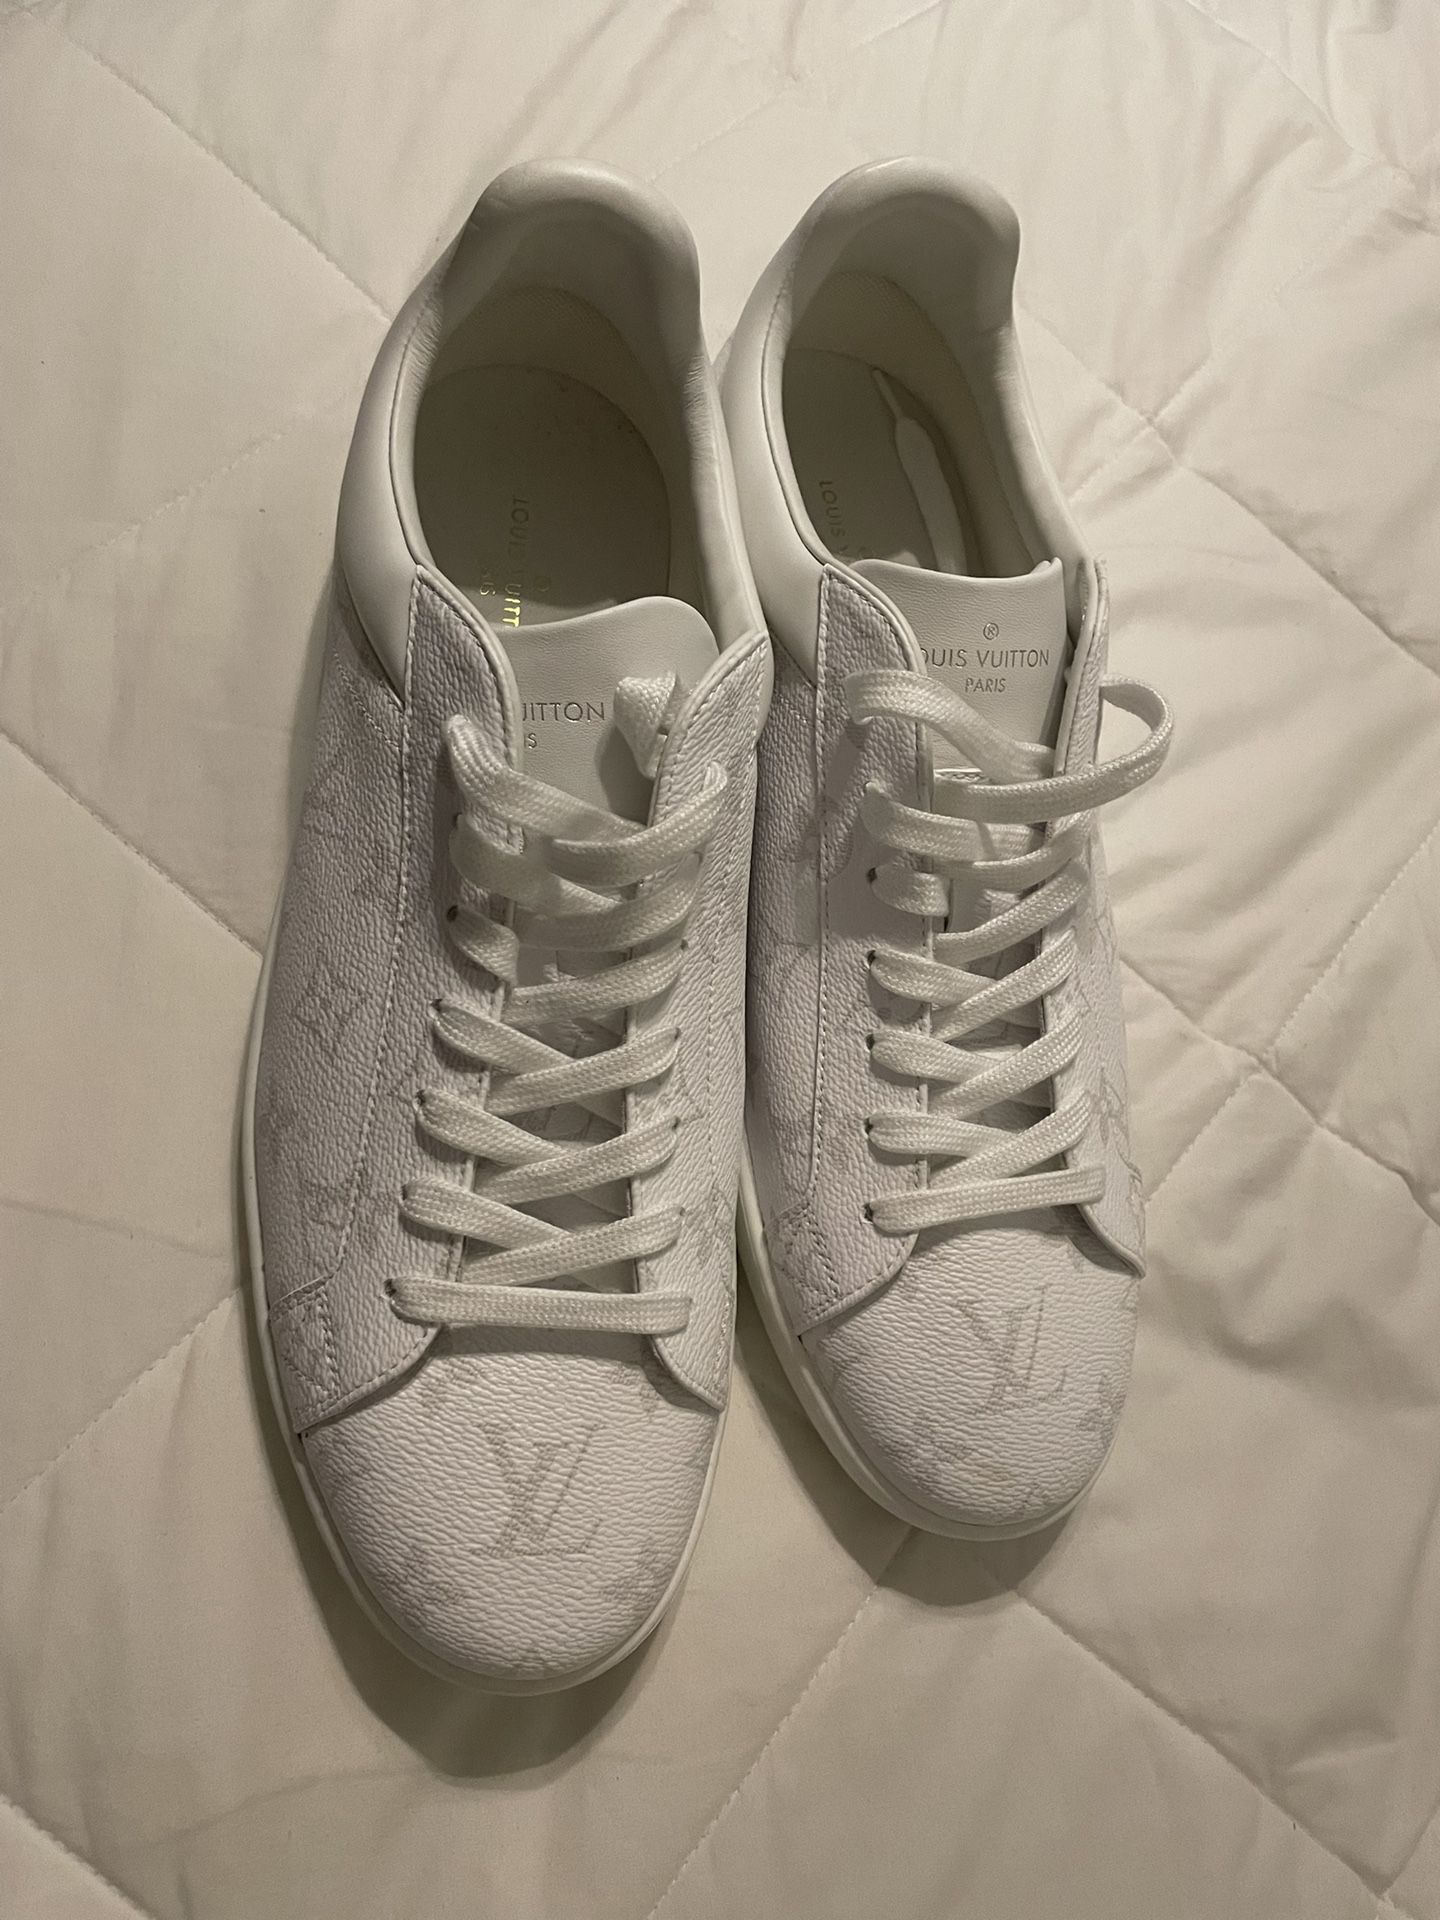 Louis Vuitton SS23 LVSK8 Sneaker Size 9/9.5 for Sale in Baltimore, MD -  OfferUp